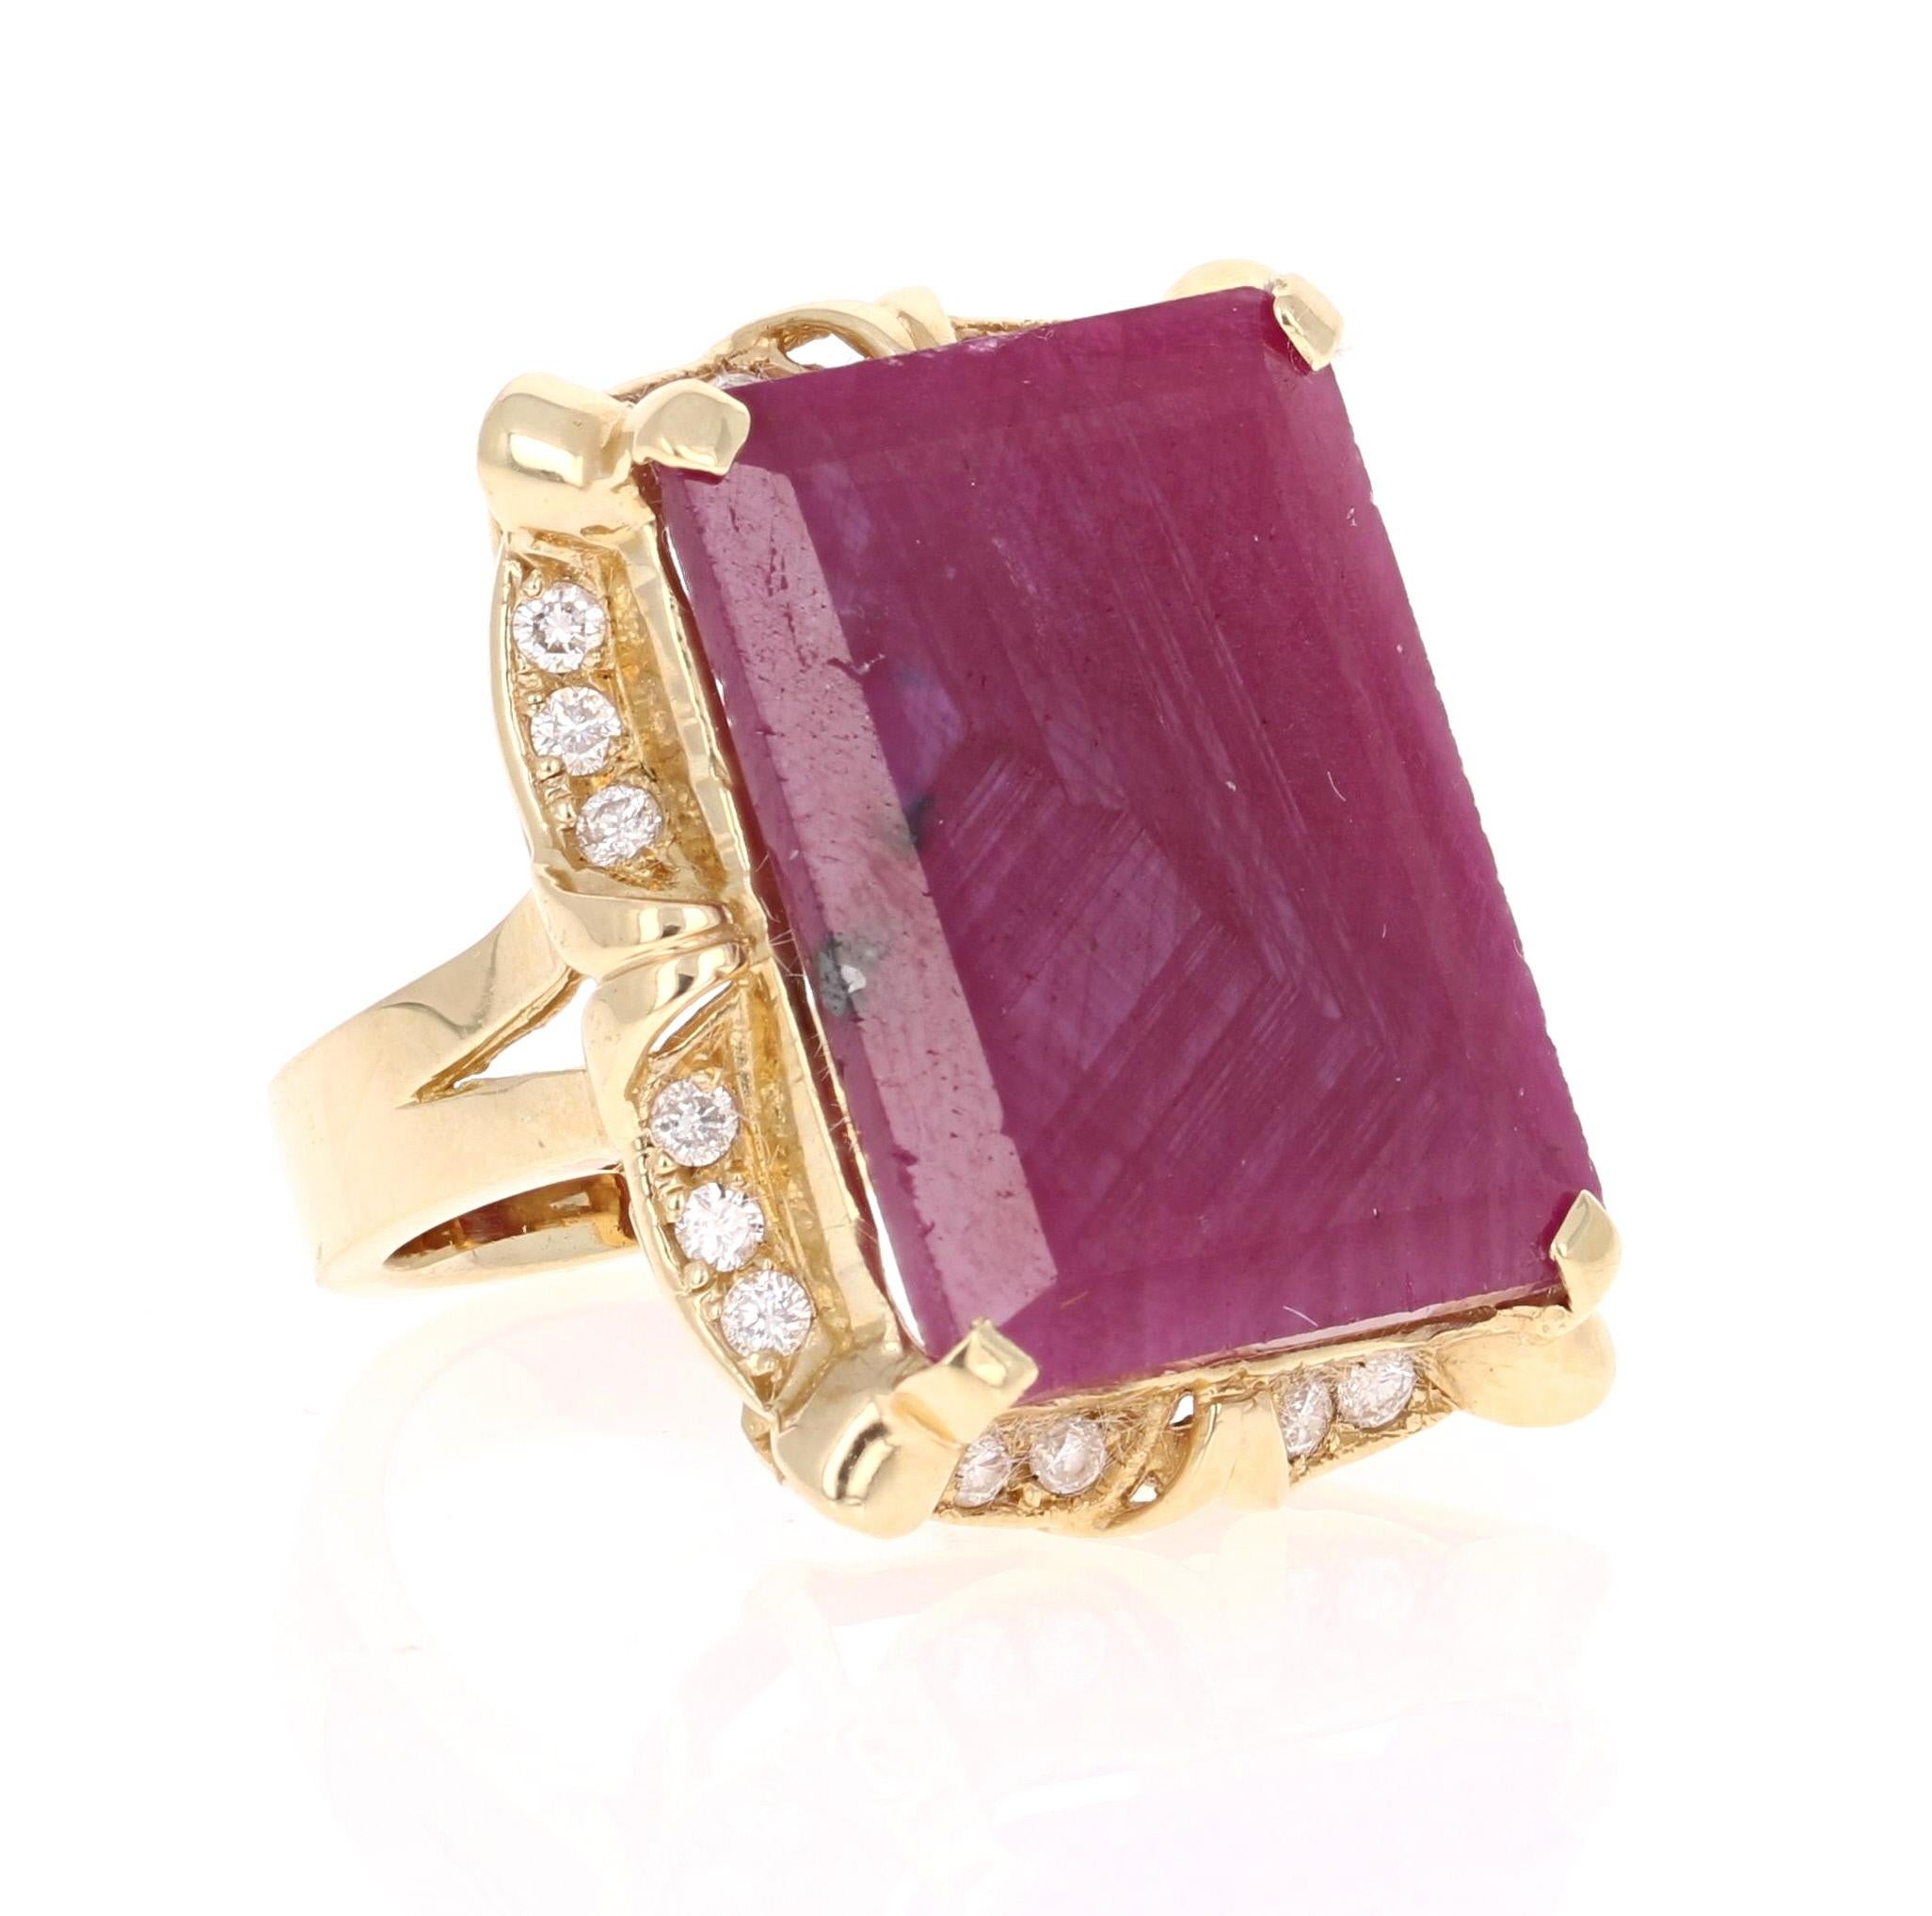 This ring is truly a one of a kind beauty with a Victorian Inspired edge!
There is a large genuine and natural Rectangular Cut Ruby set in the center of the ring that weighs 20.50 carats.  
It is surrounded by 20 Round Cut Diamonds that weigh 0.51